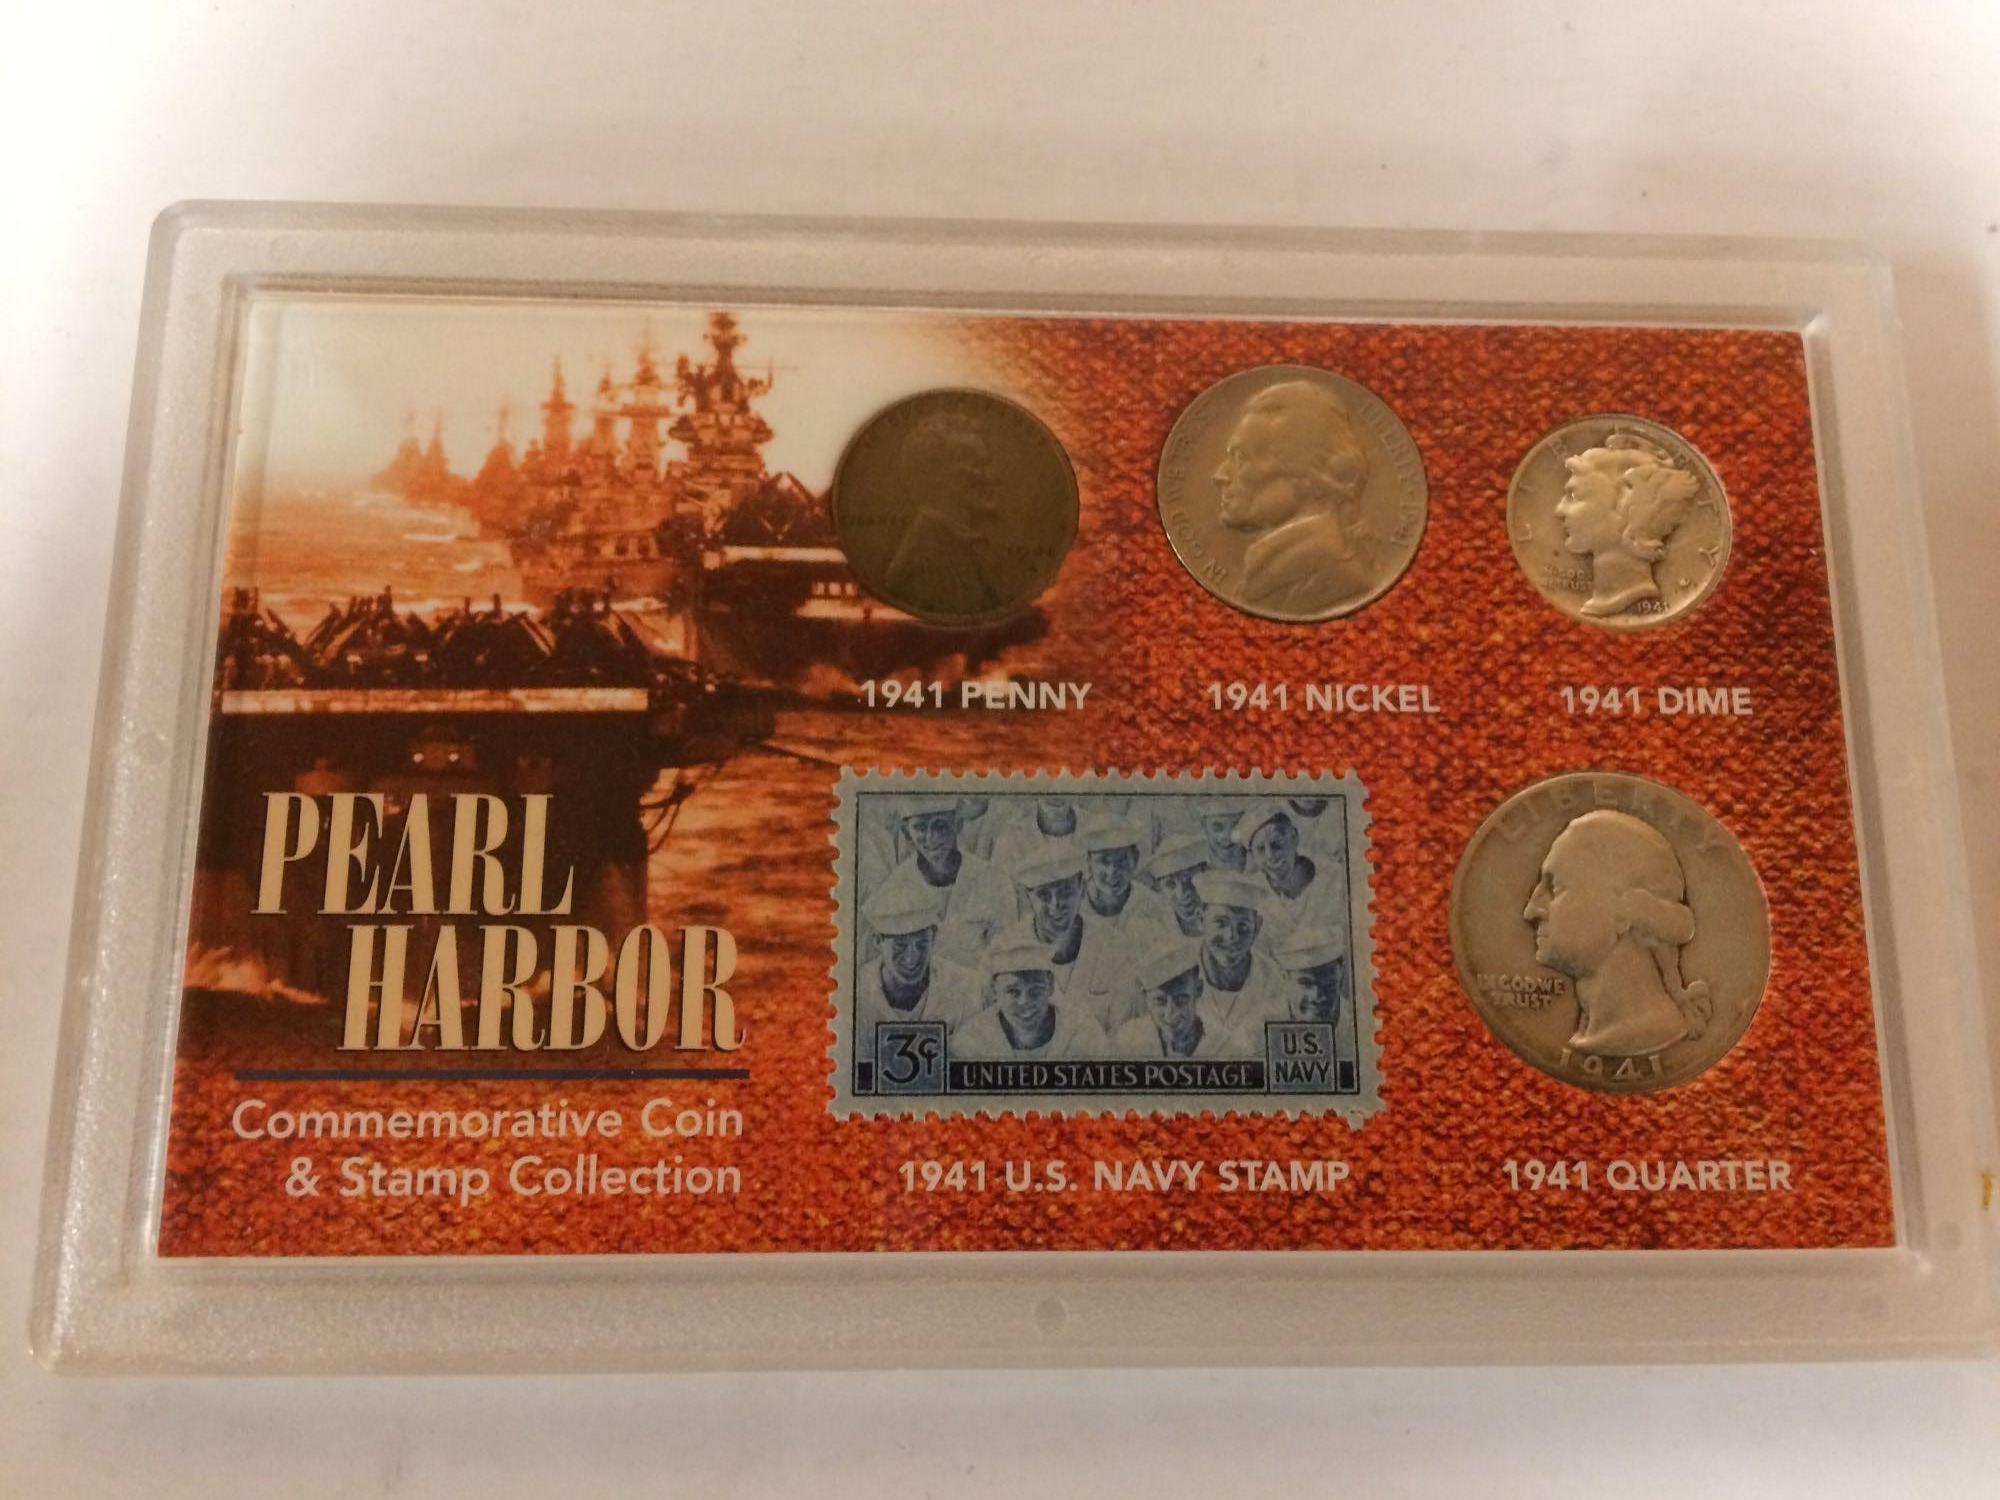 Pearl harbor commemorative coin and stamp collection